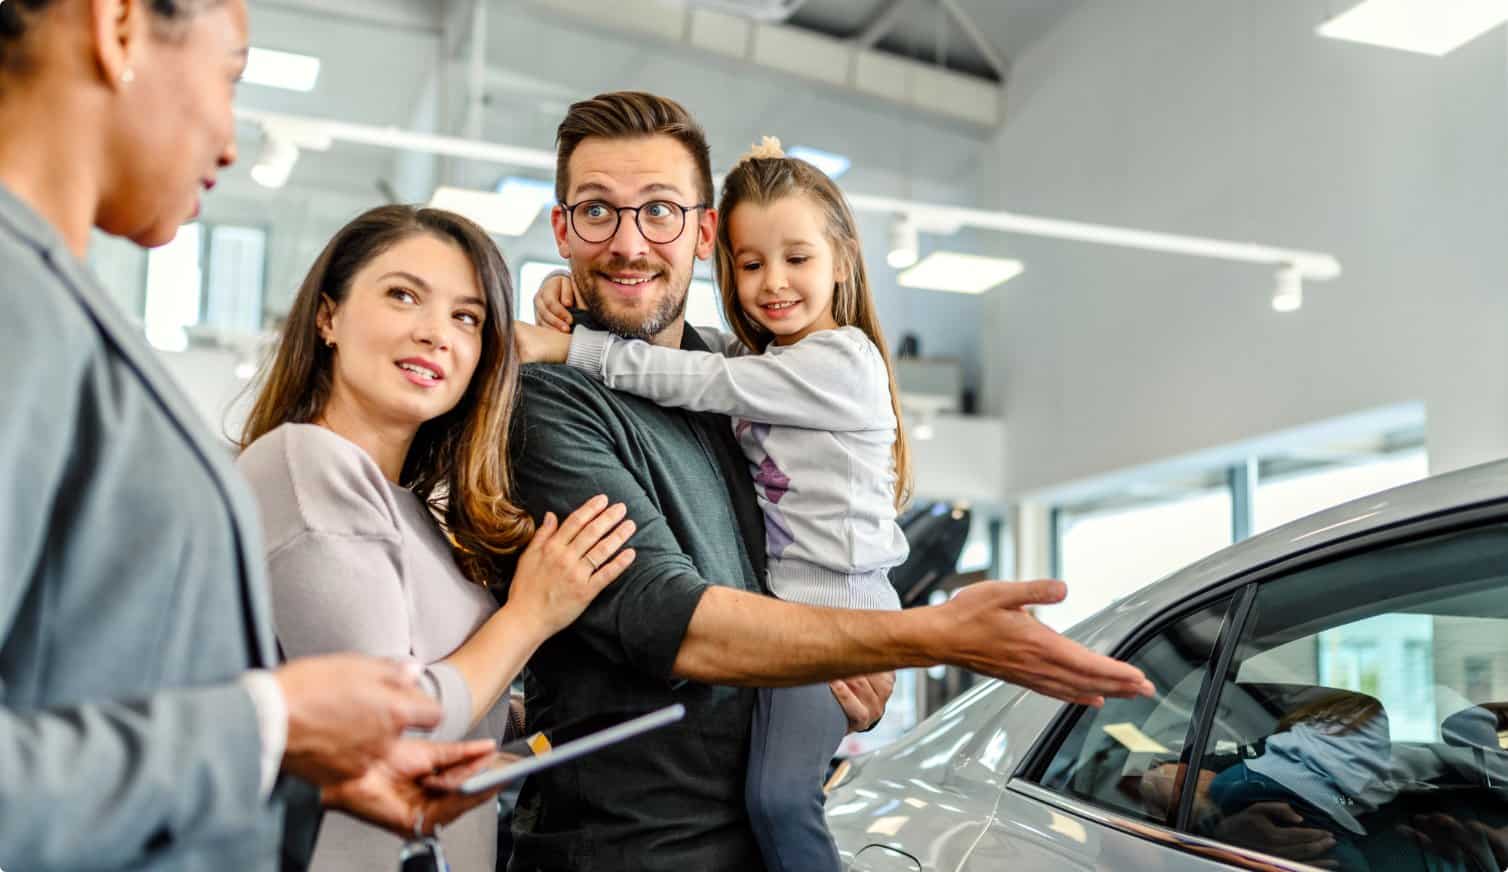 Family buying a new car in a dealership.